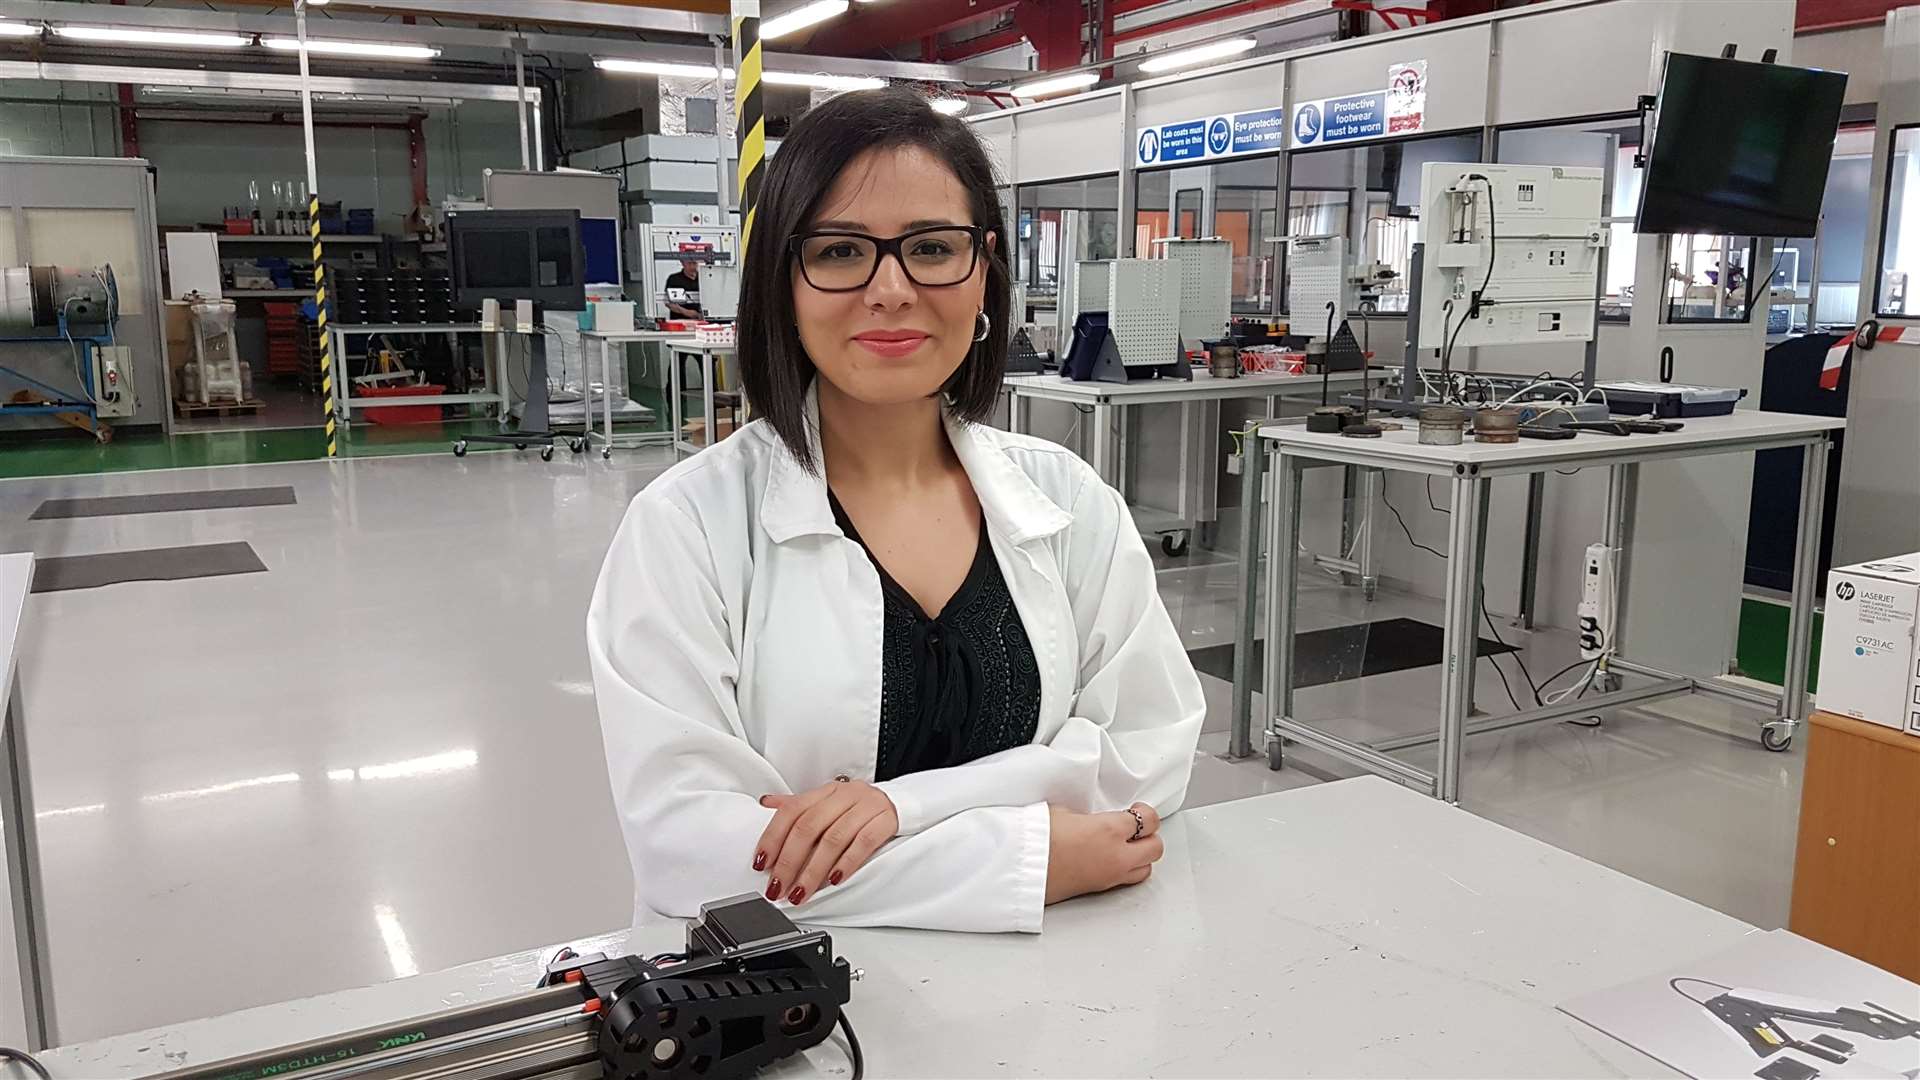 Former student and current Teaching Demonstrator Ayse Cagla Balaban says the University of Greenwich Medway Campus is ideal for those seeking a career in engineering.